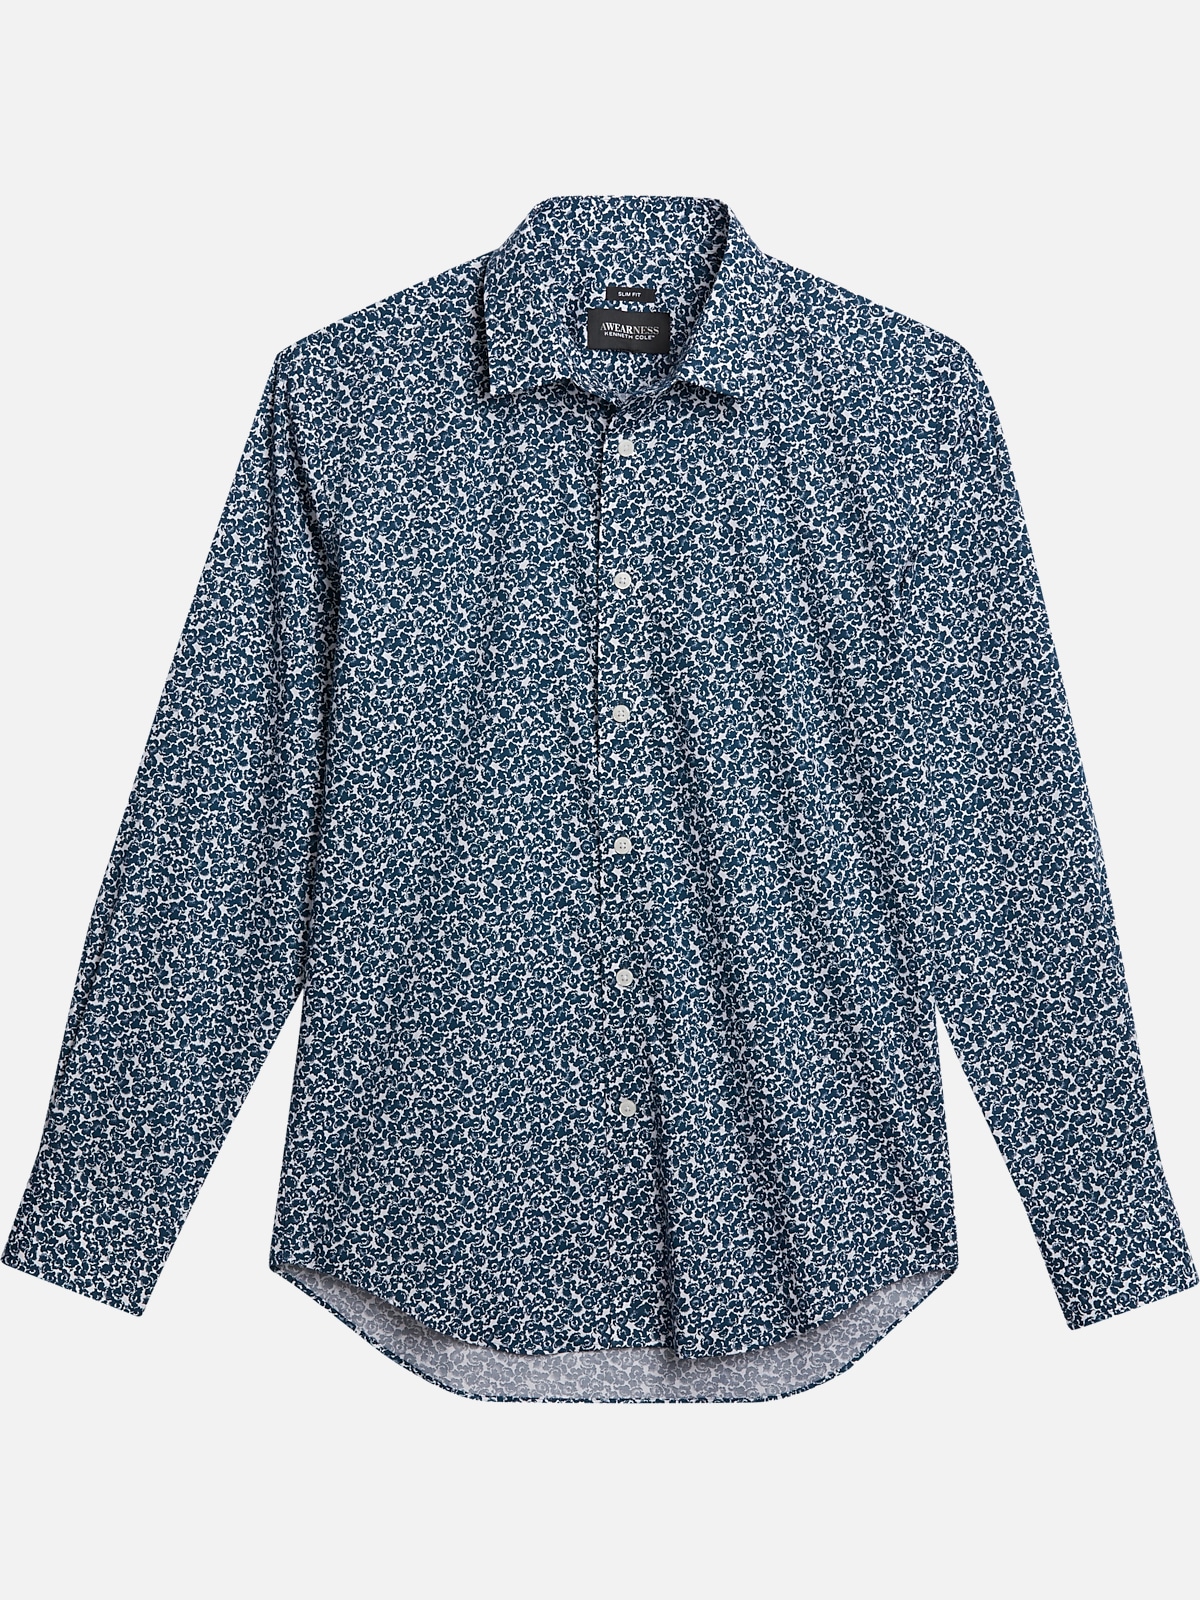 Awearness Kenneth Cole Slim Fit Floral Spread Collar Sport Shirt | All ...